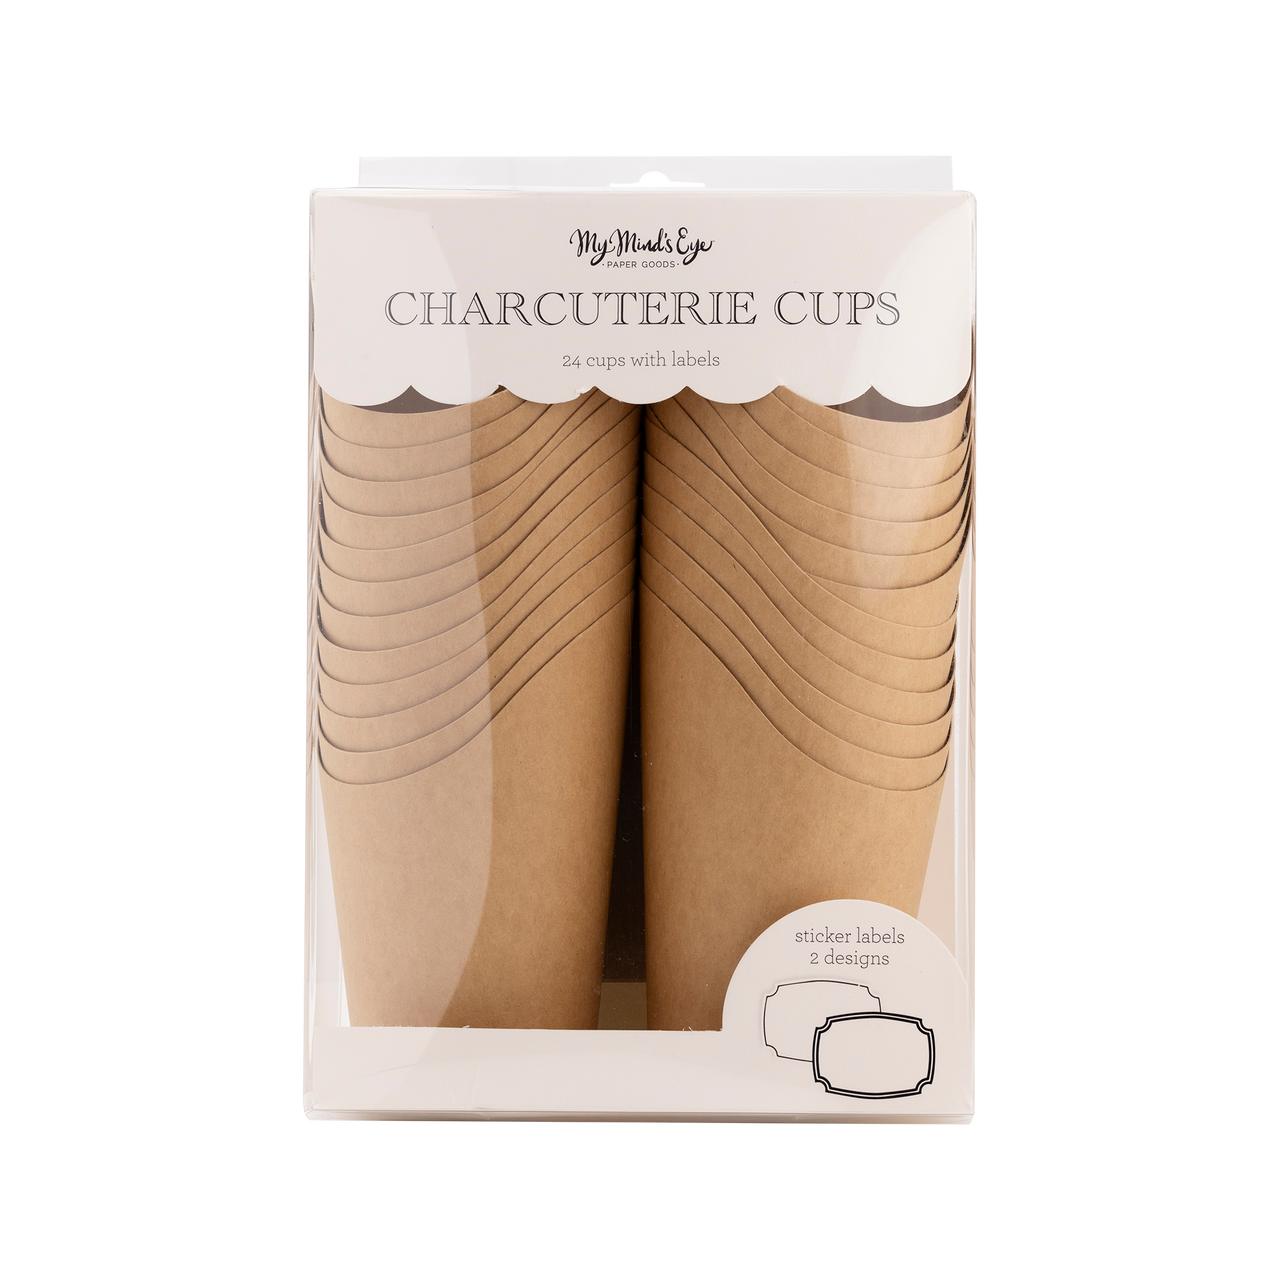 Kraft Charcuterie Cups with sticker labels (24ct)  My Mind’s Eye   